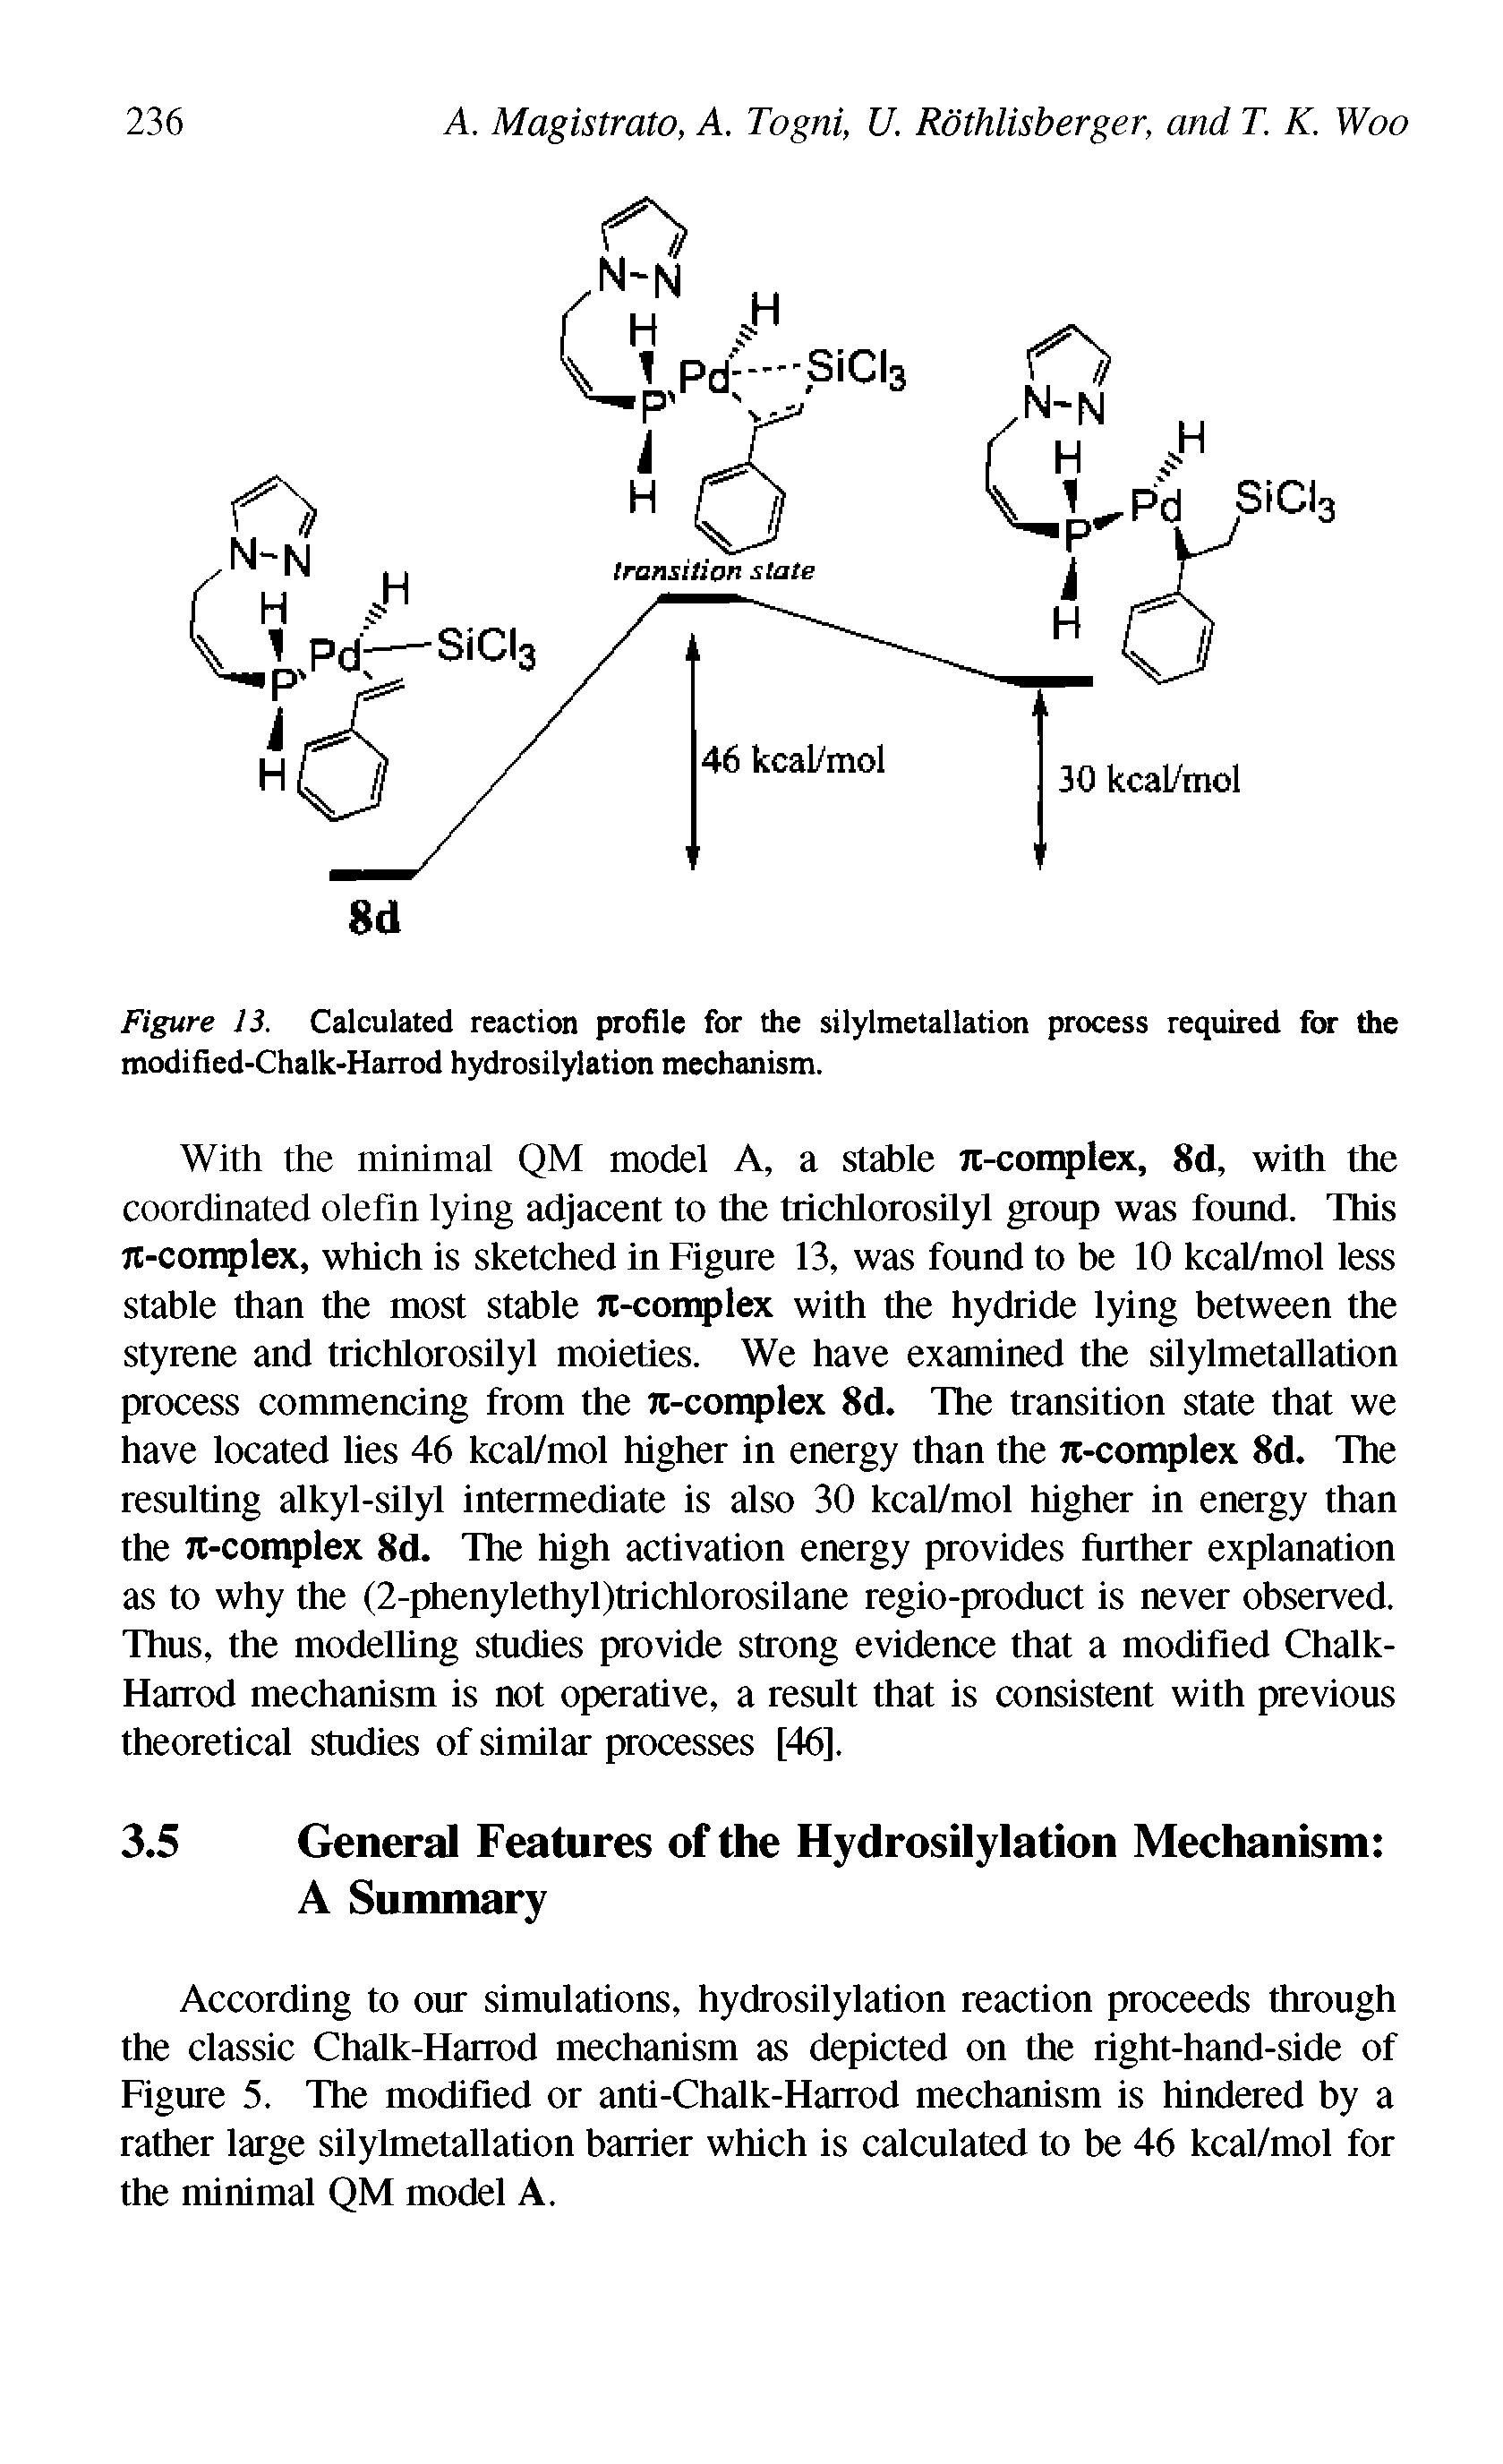 Figure 13. Calculated reaction profile for the silylmetallation process required for the modified-Chalk-Harrod hydrosilylation mechanism.